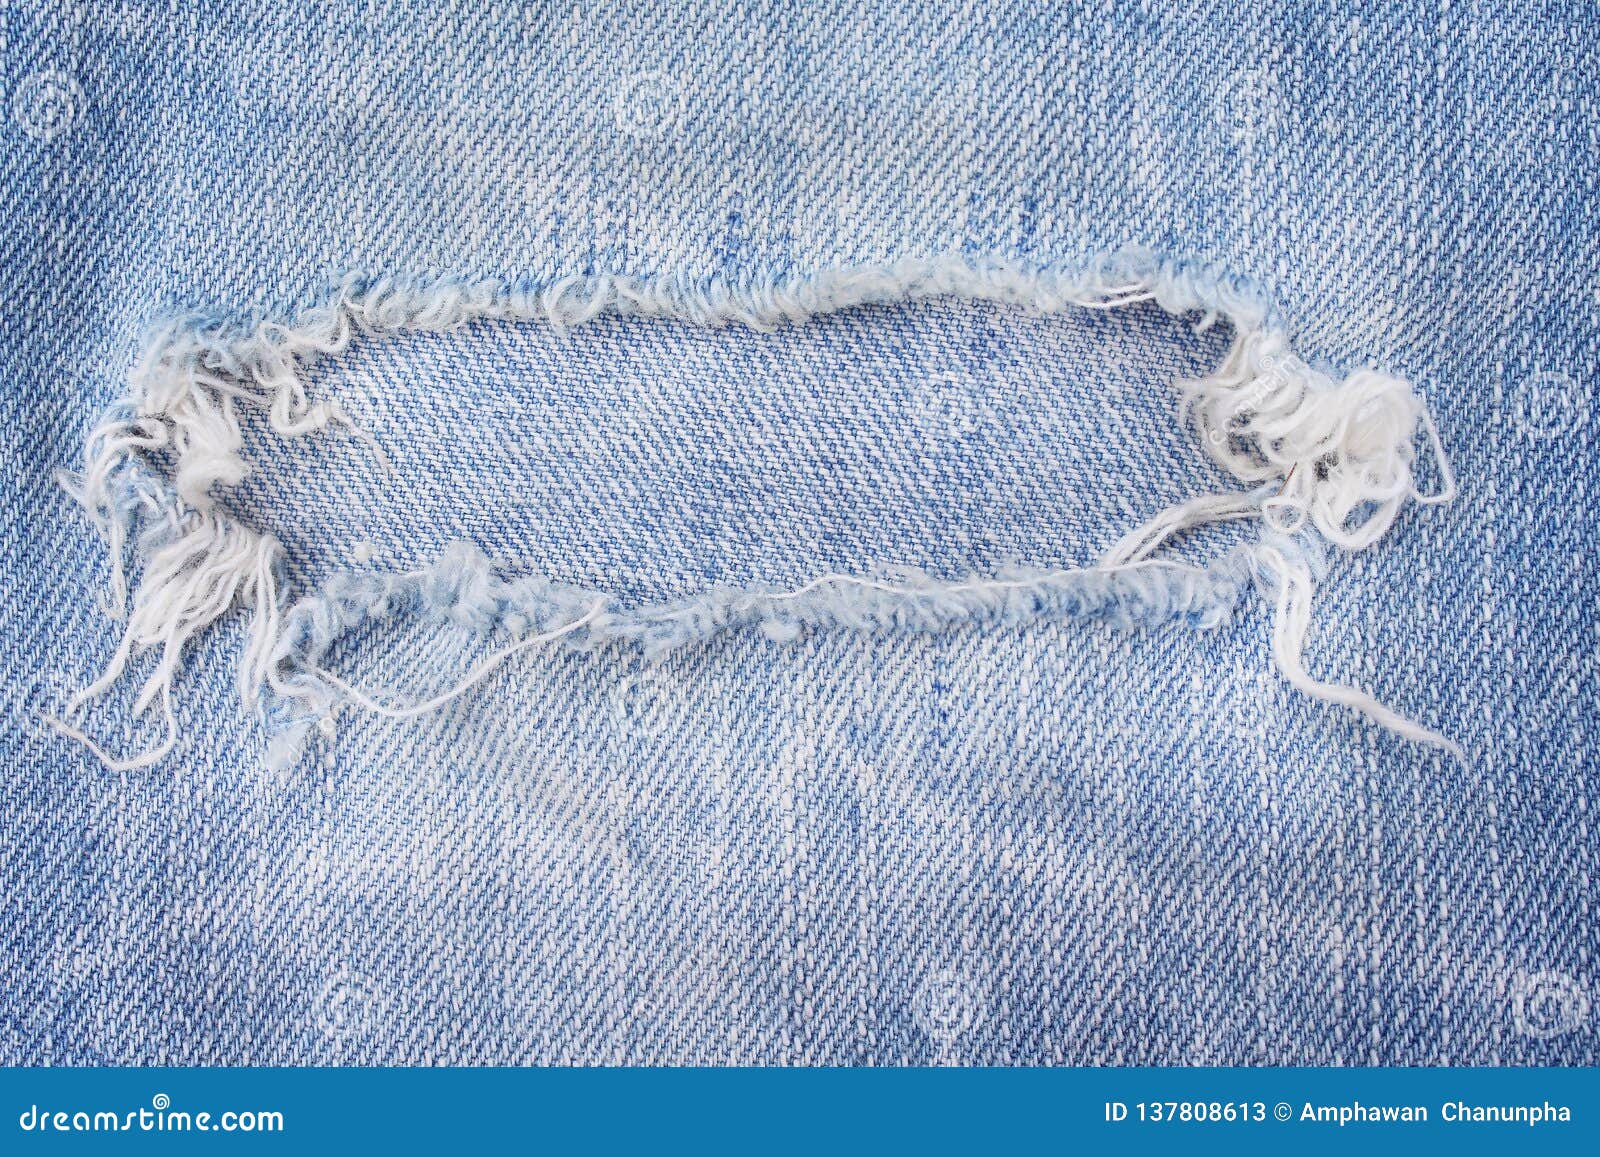 Blue Jeans With Ripped Patterns Texture For Background, Hole And White ...